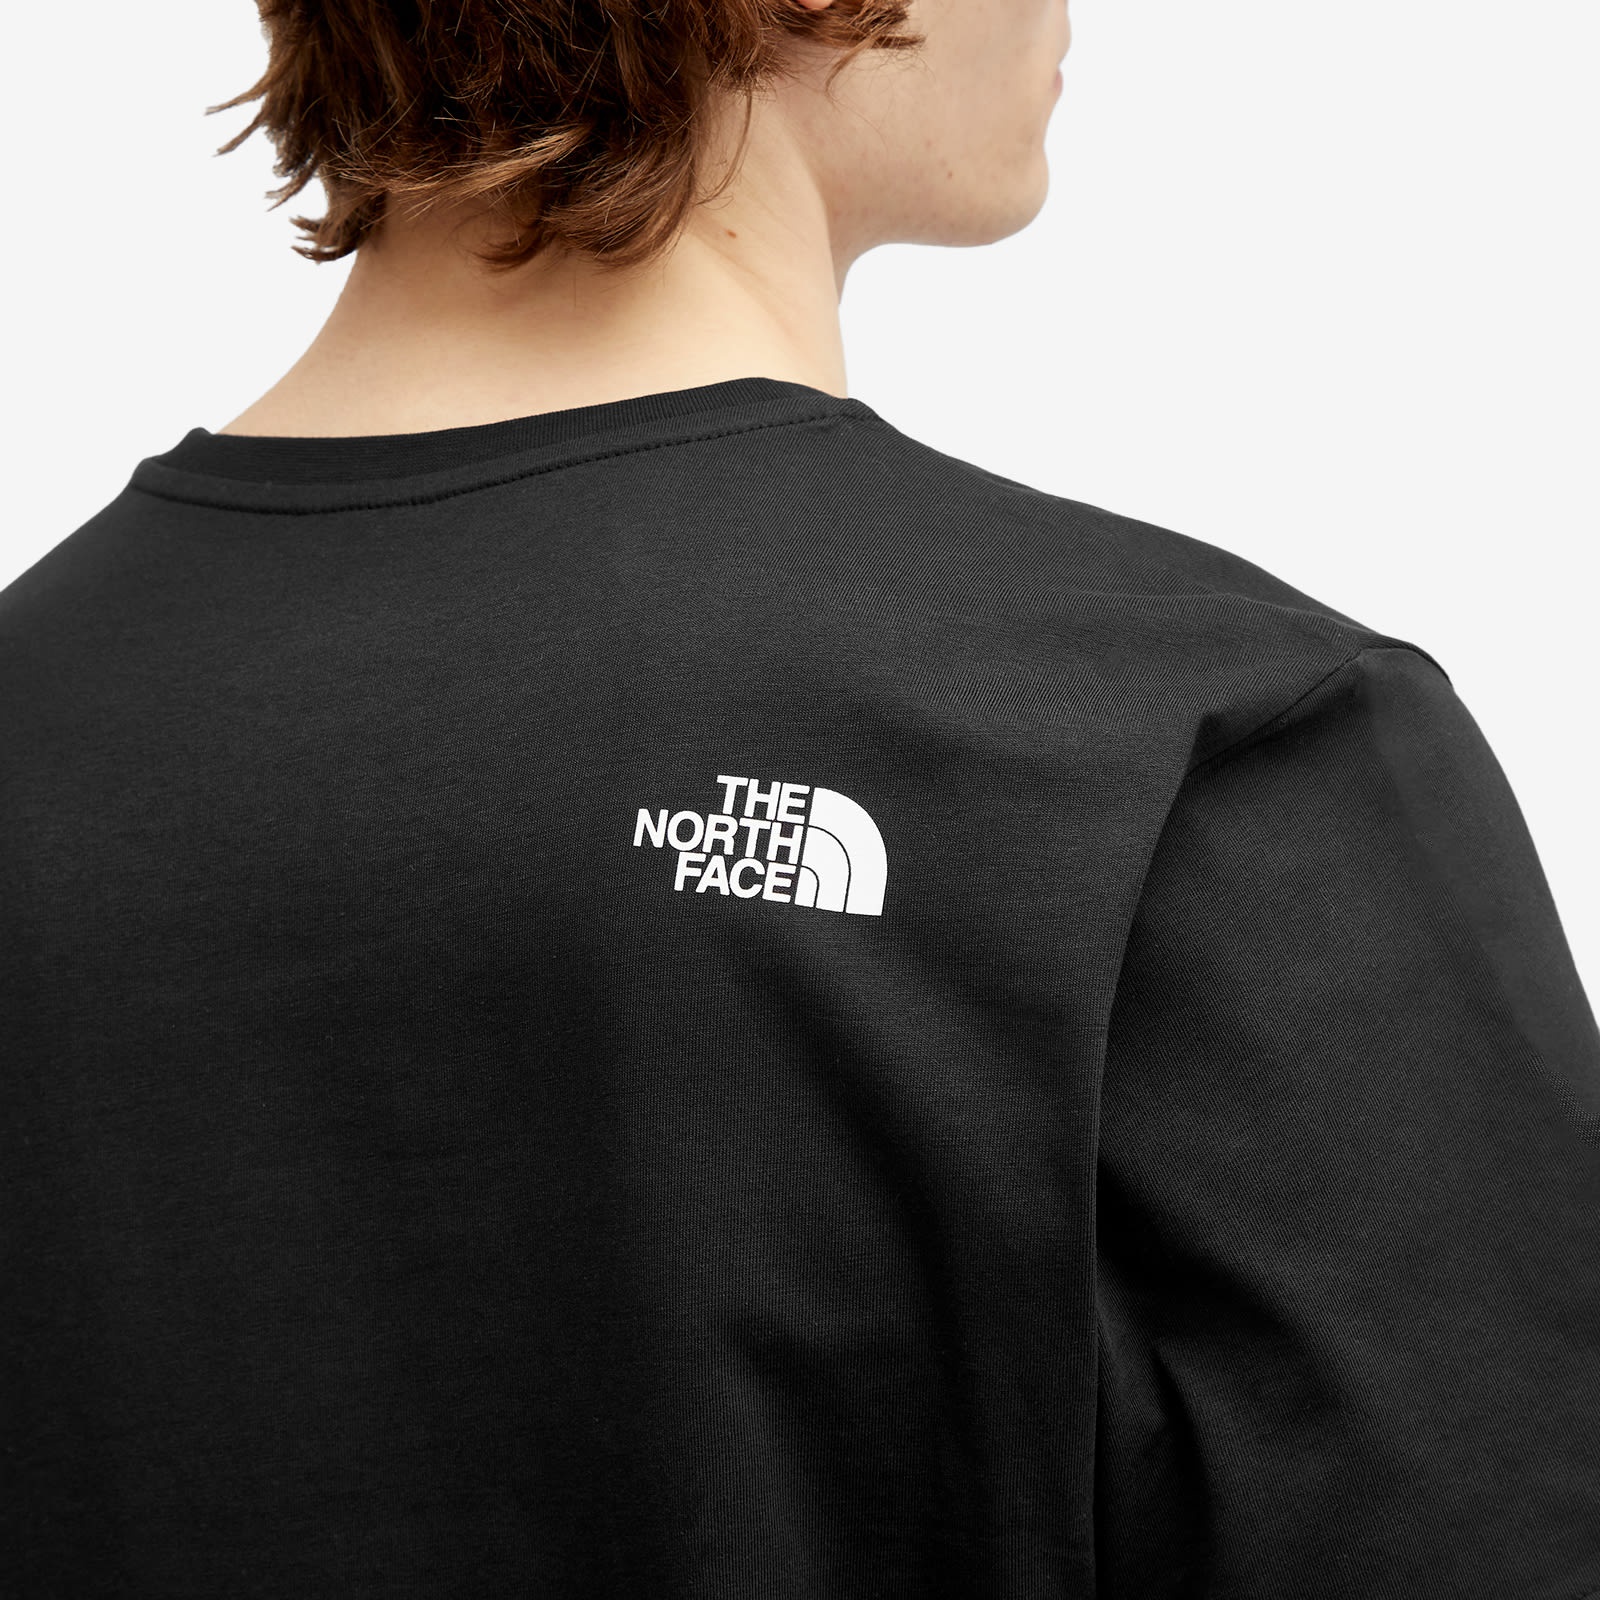 The North Face Never Stop Exploring T-Shirt - 5